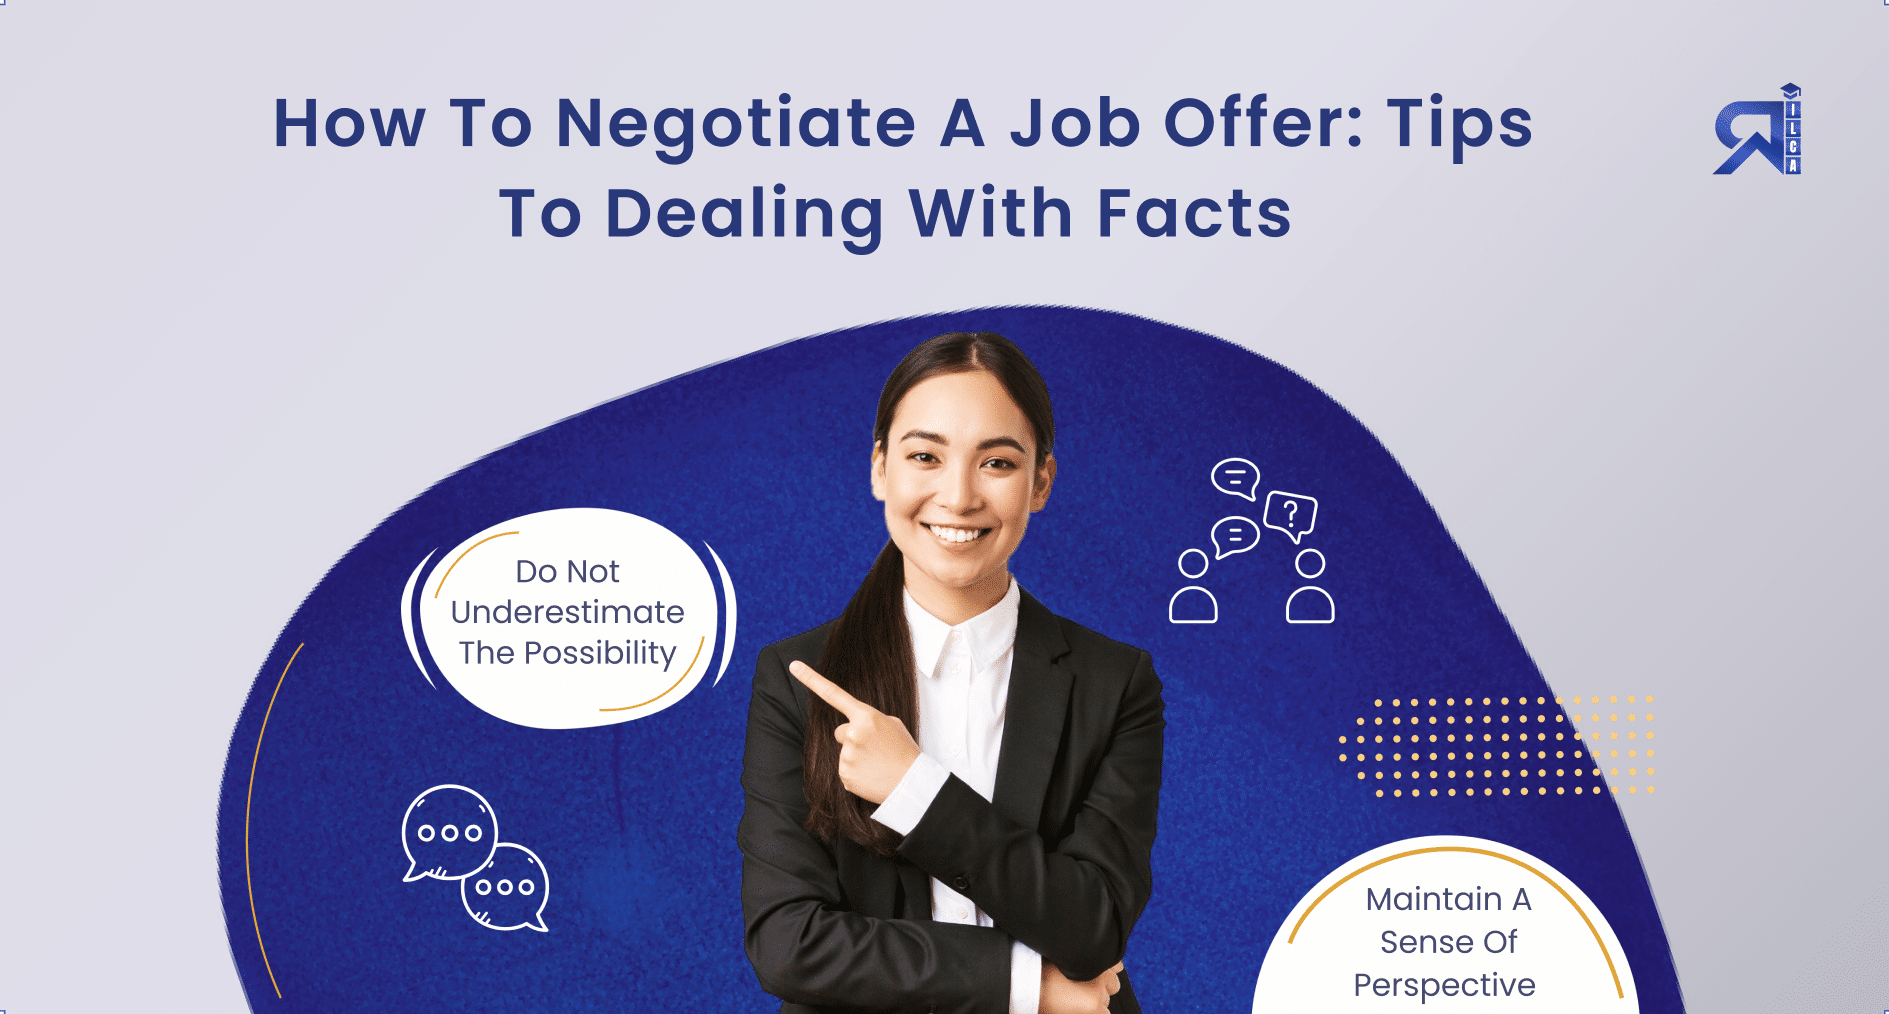 How To Negotiate A Job Offer: Tips To Dealing With Facts